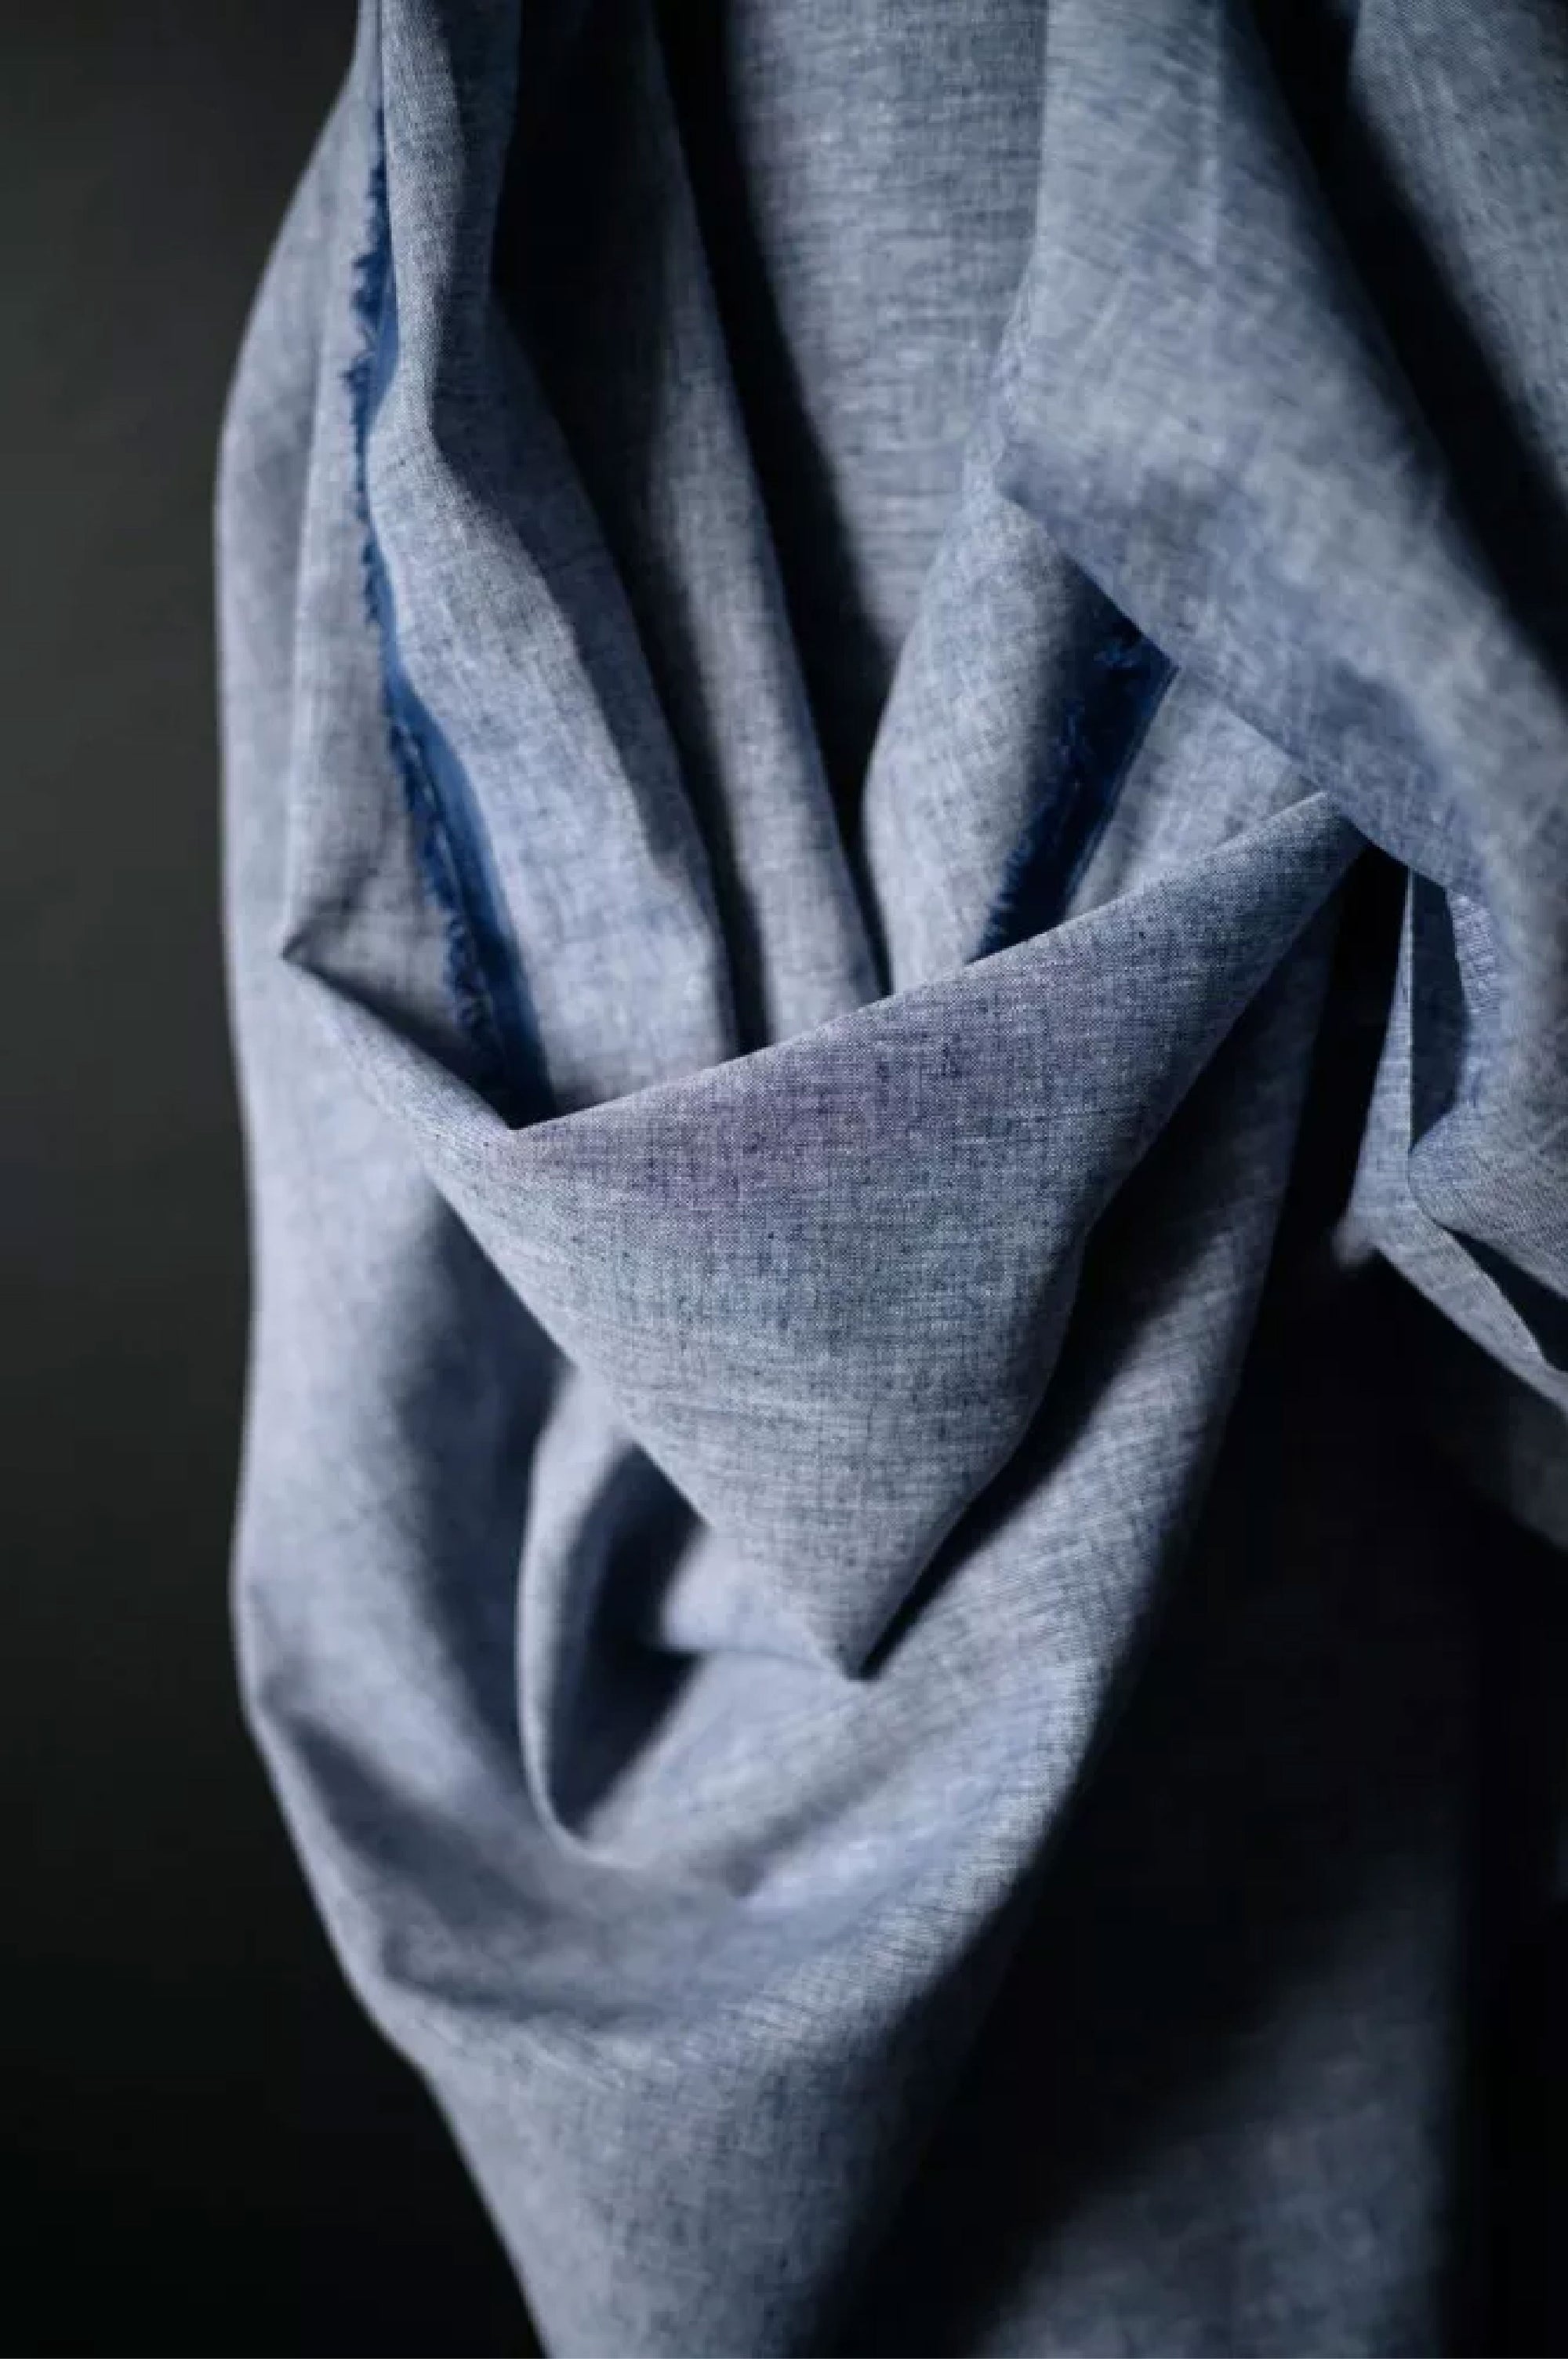 A roll of classic denim bright blue chambray on a dark navy background.